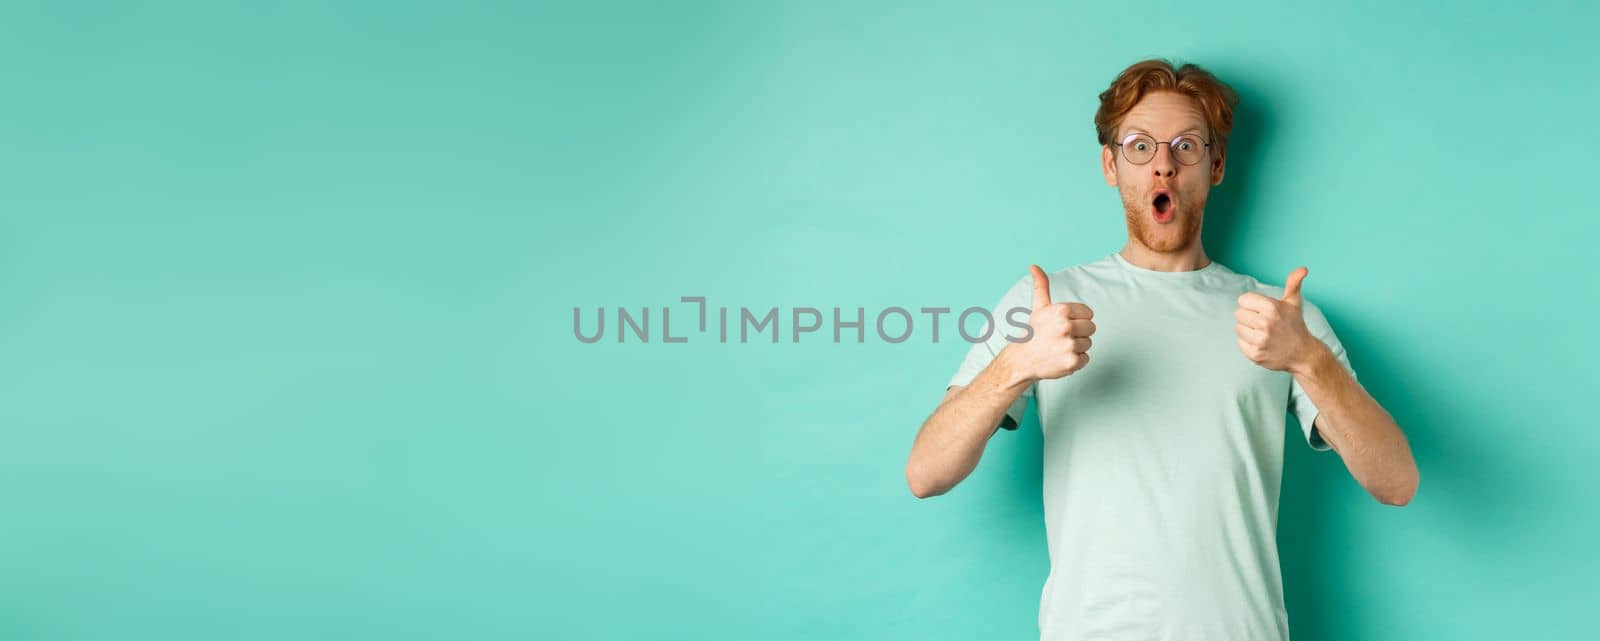 Amazed young man with red hair and beard, wearing glasses with t-shirt, showing thumbs-up and gasping in awe, checking out awesome promo offer, turquoise background.